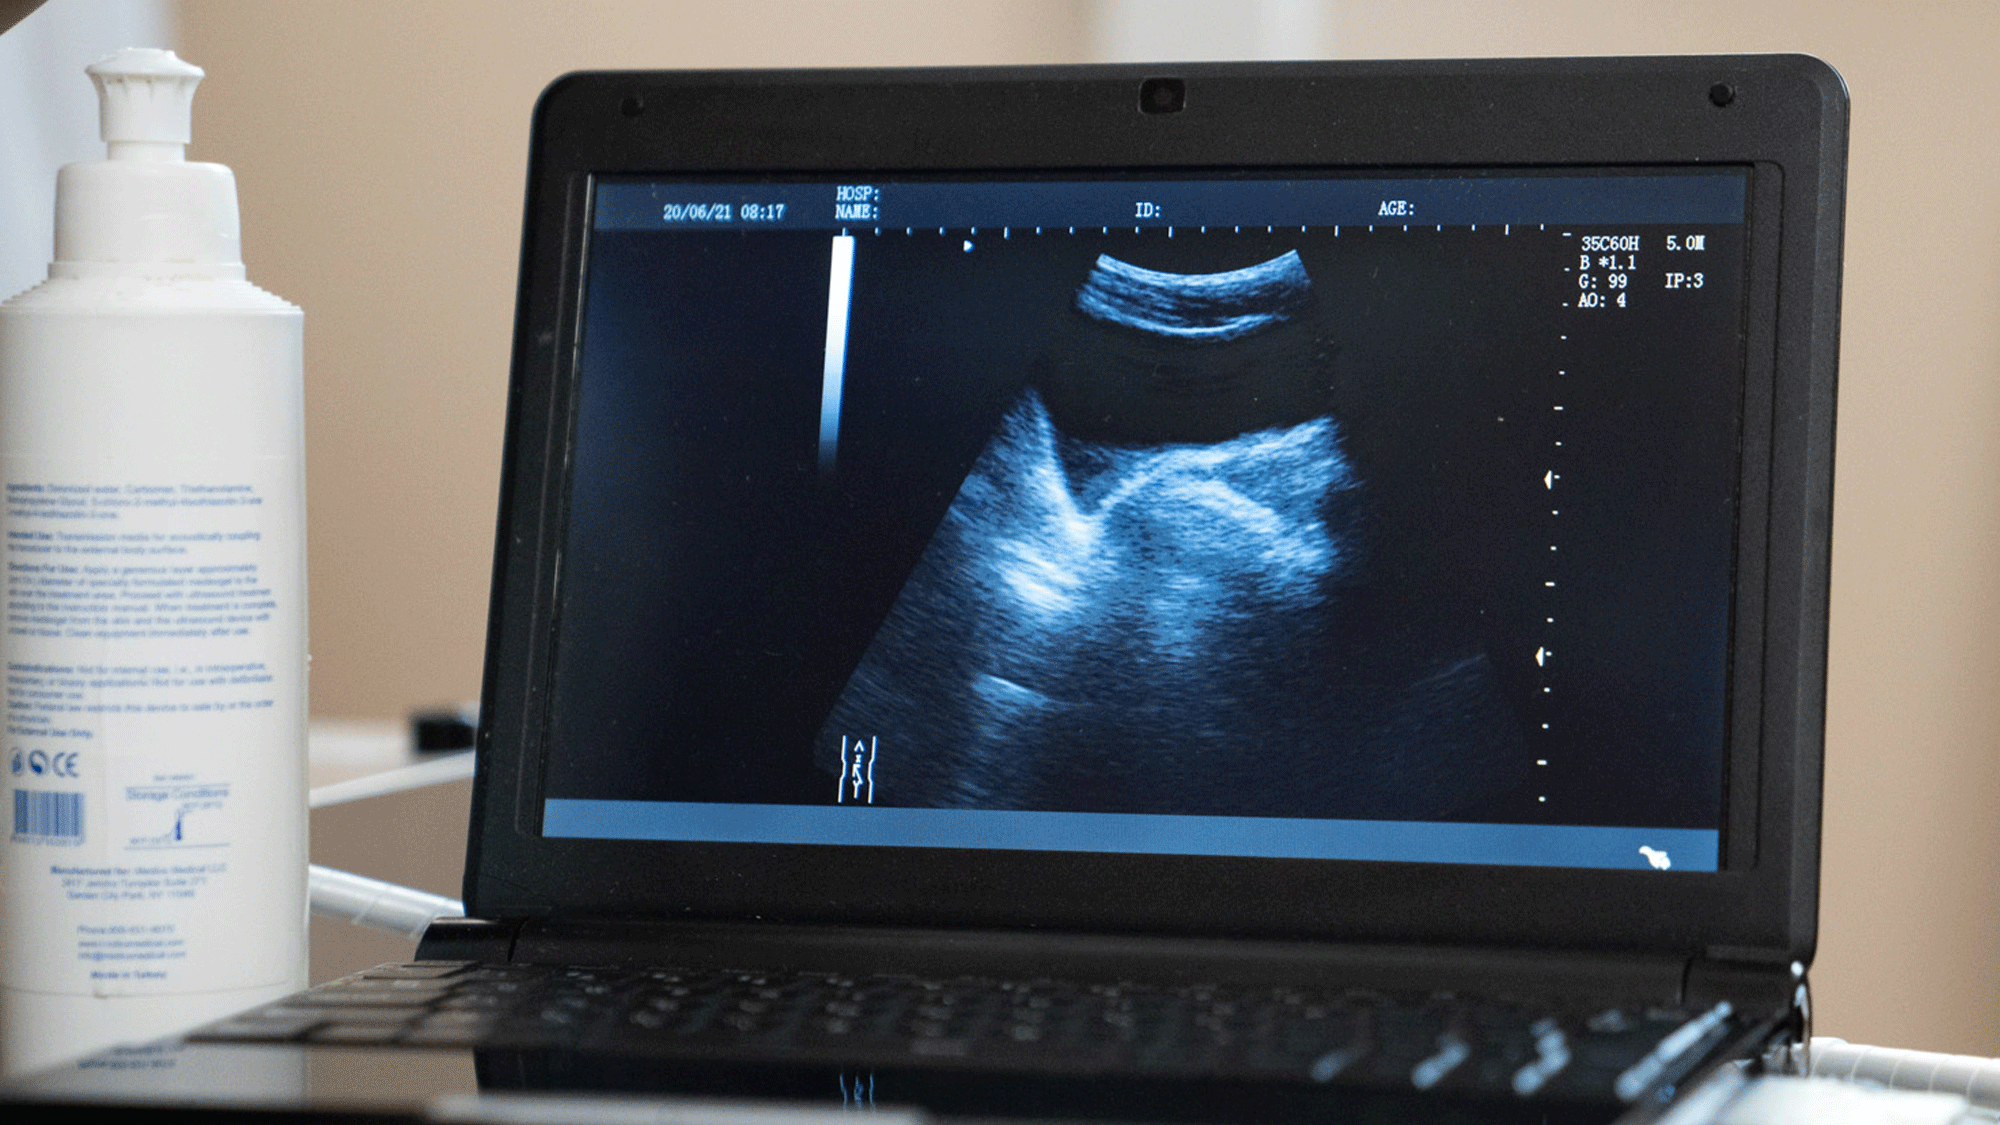 Ultrasound Of Anal Sex - Here's What An Ultrasound Of Someone Getting Butt Fucked Looks Like -  TheSword.com